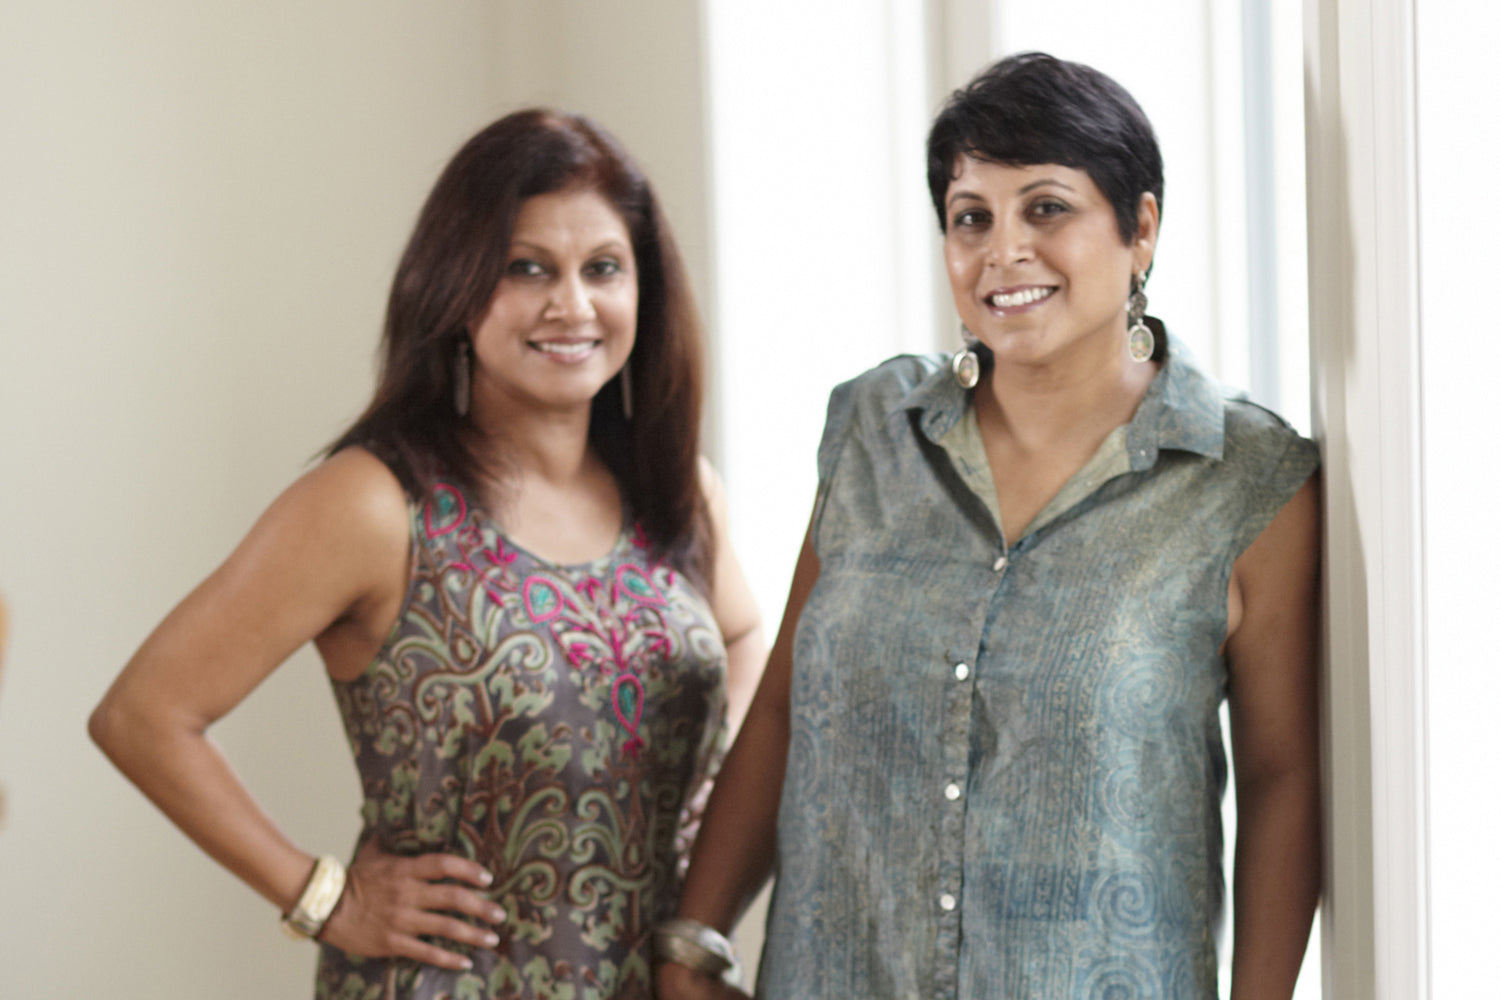 Photo of two brunette women wearing dresses and bangles and standing next to each other in an airy room with white walls. 